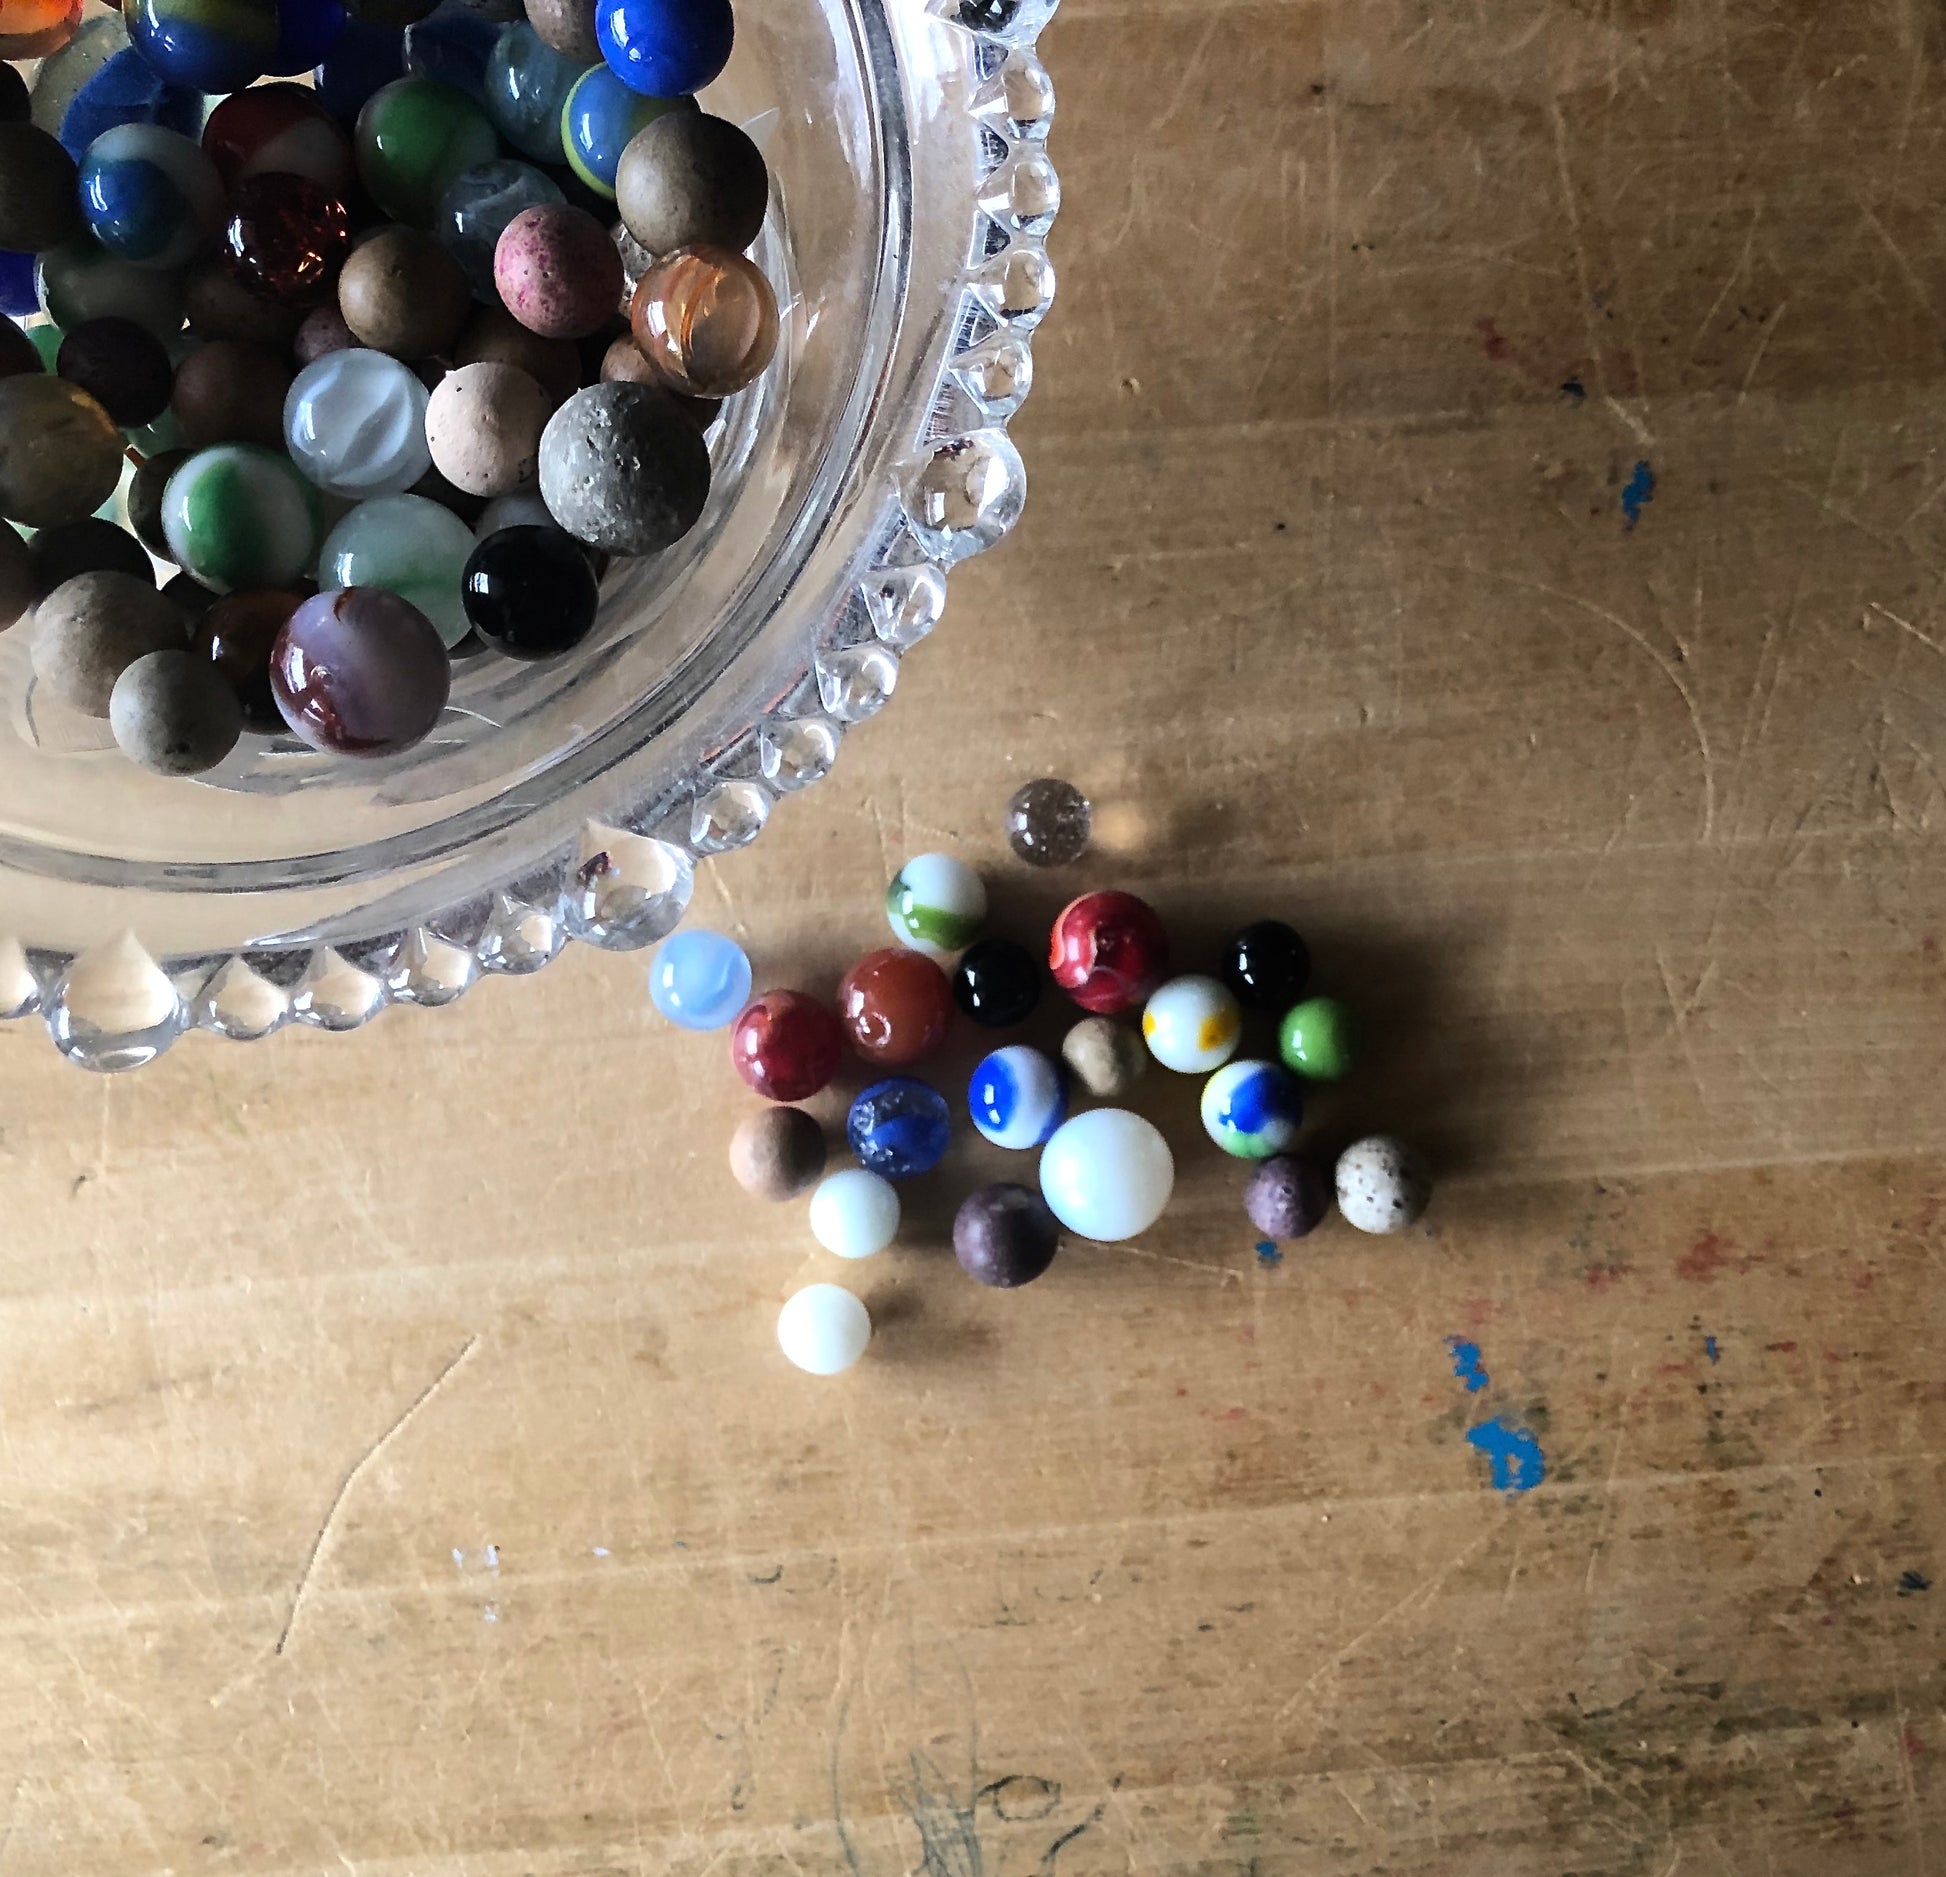 Set of 100 Vintage and Antique Marbles